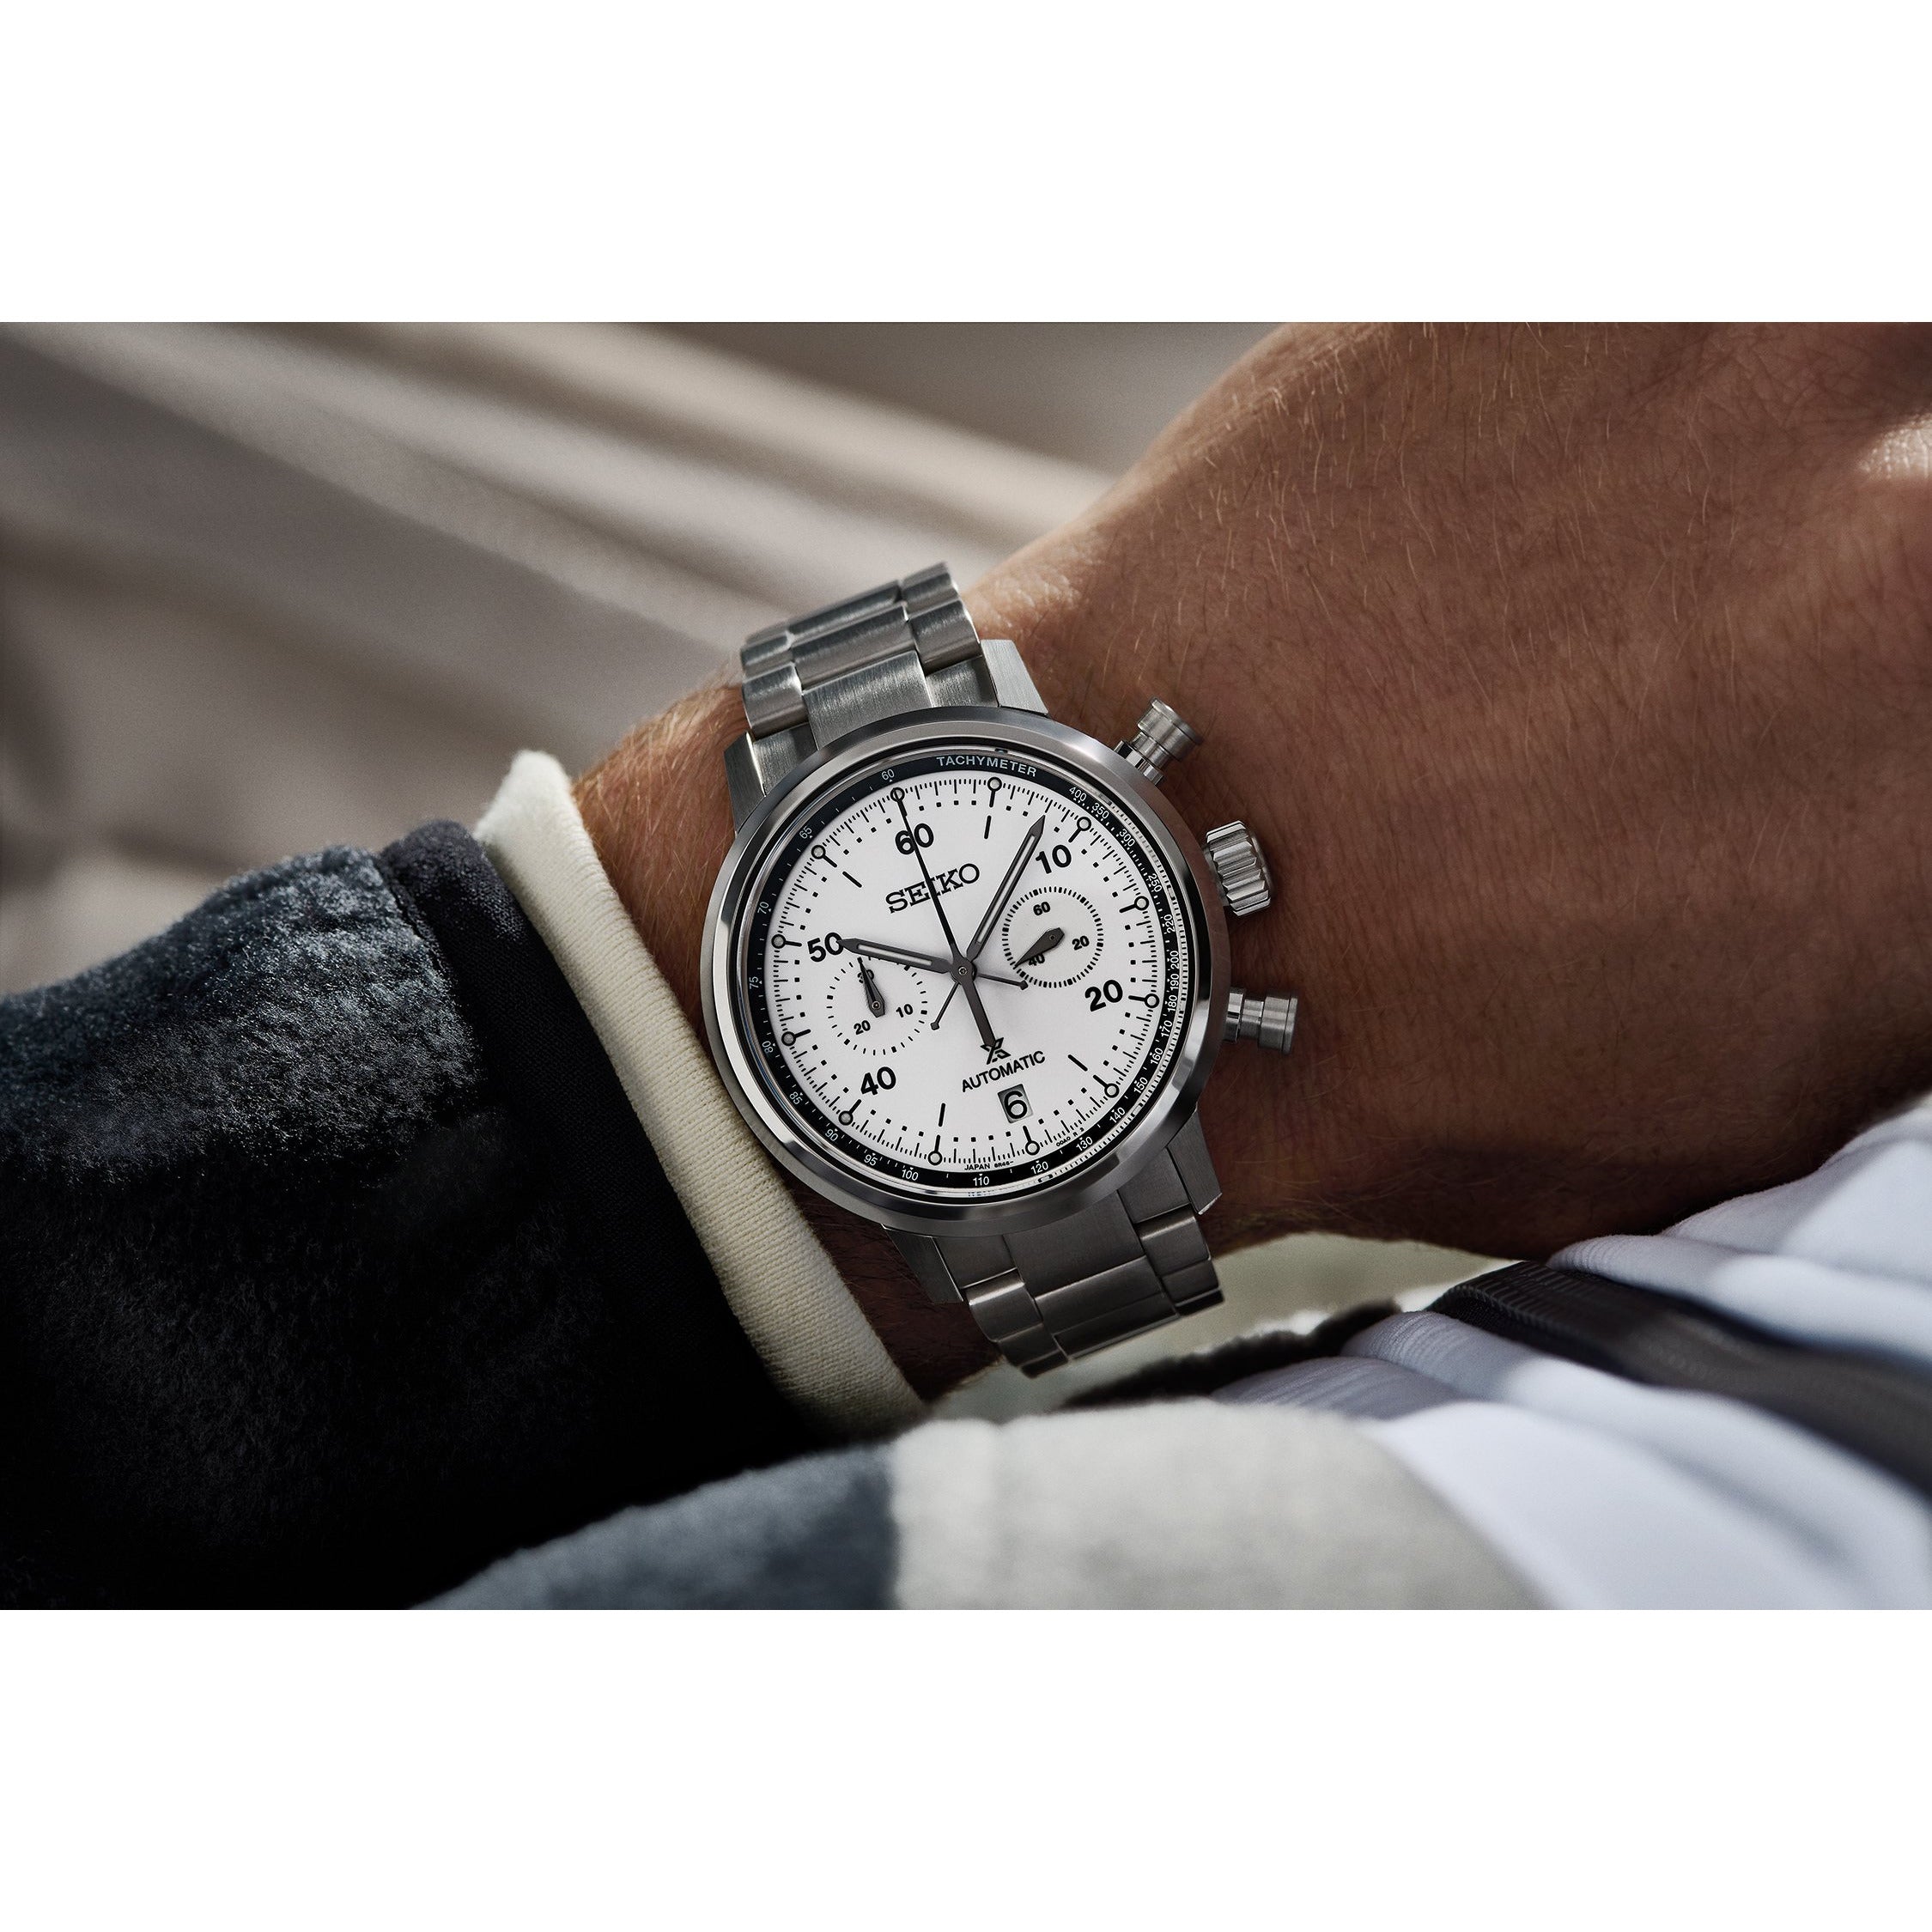 Seiko Speedtimer 1964 Chronograph Limited Edition – Classic Creations